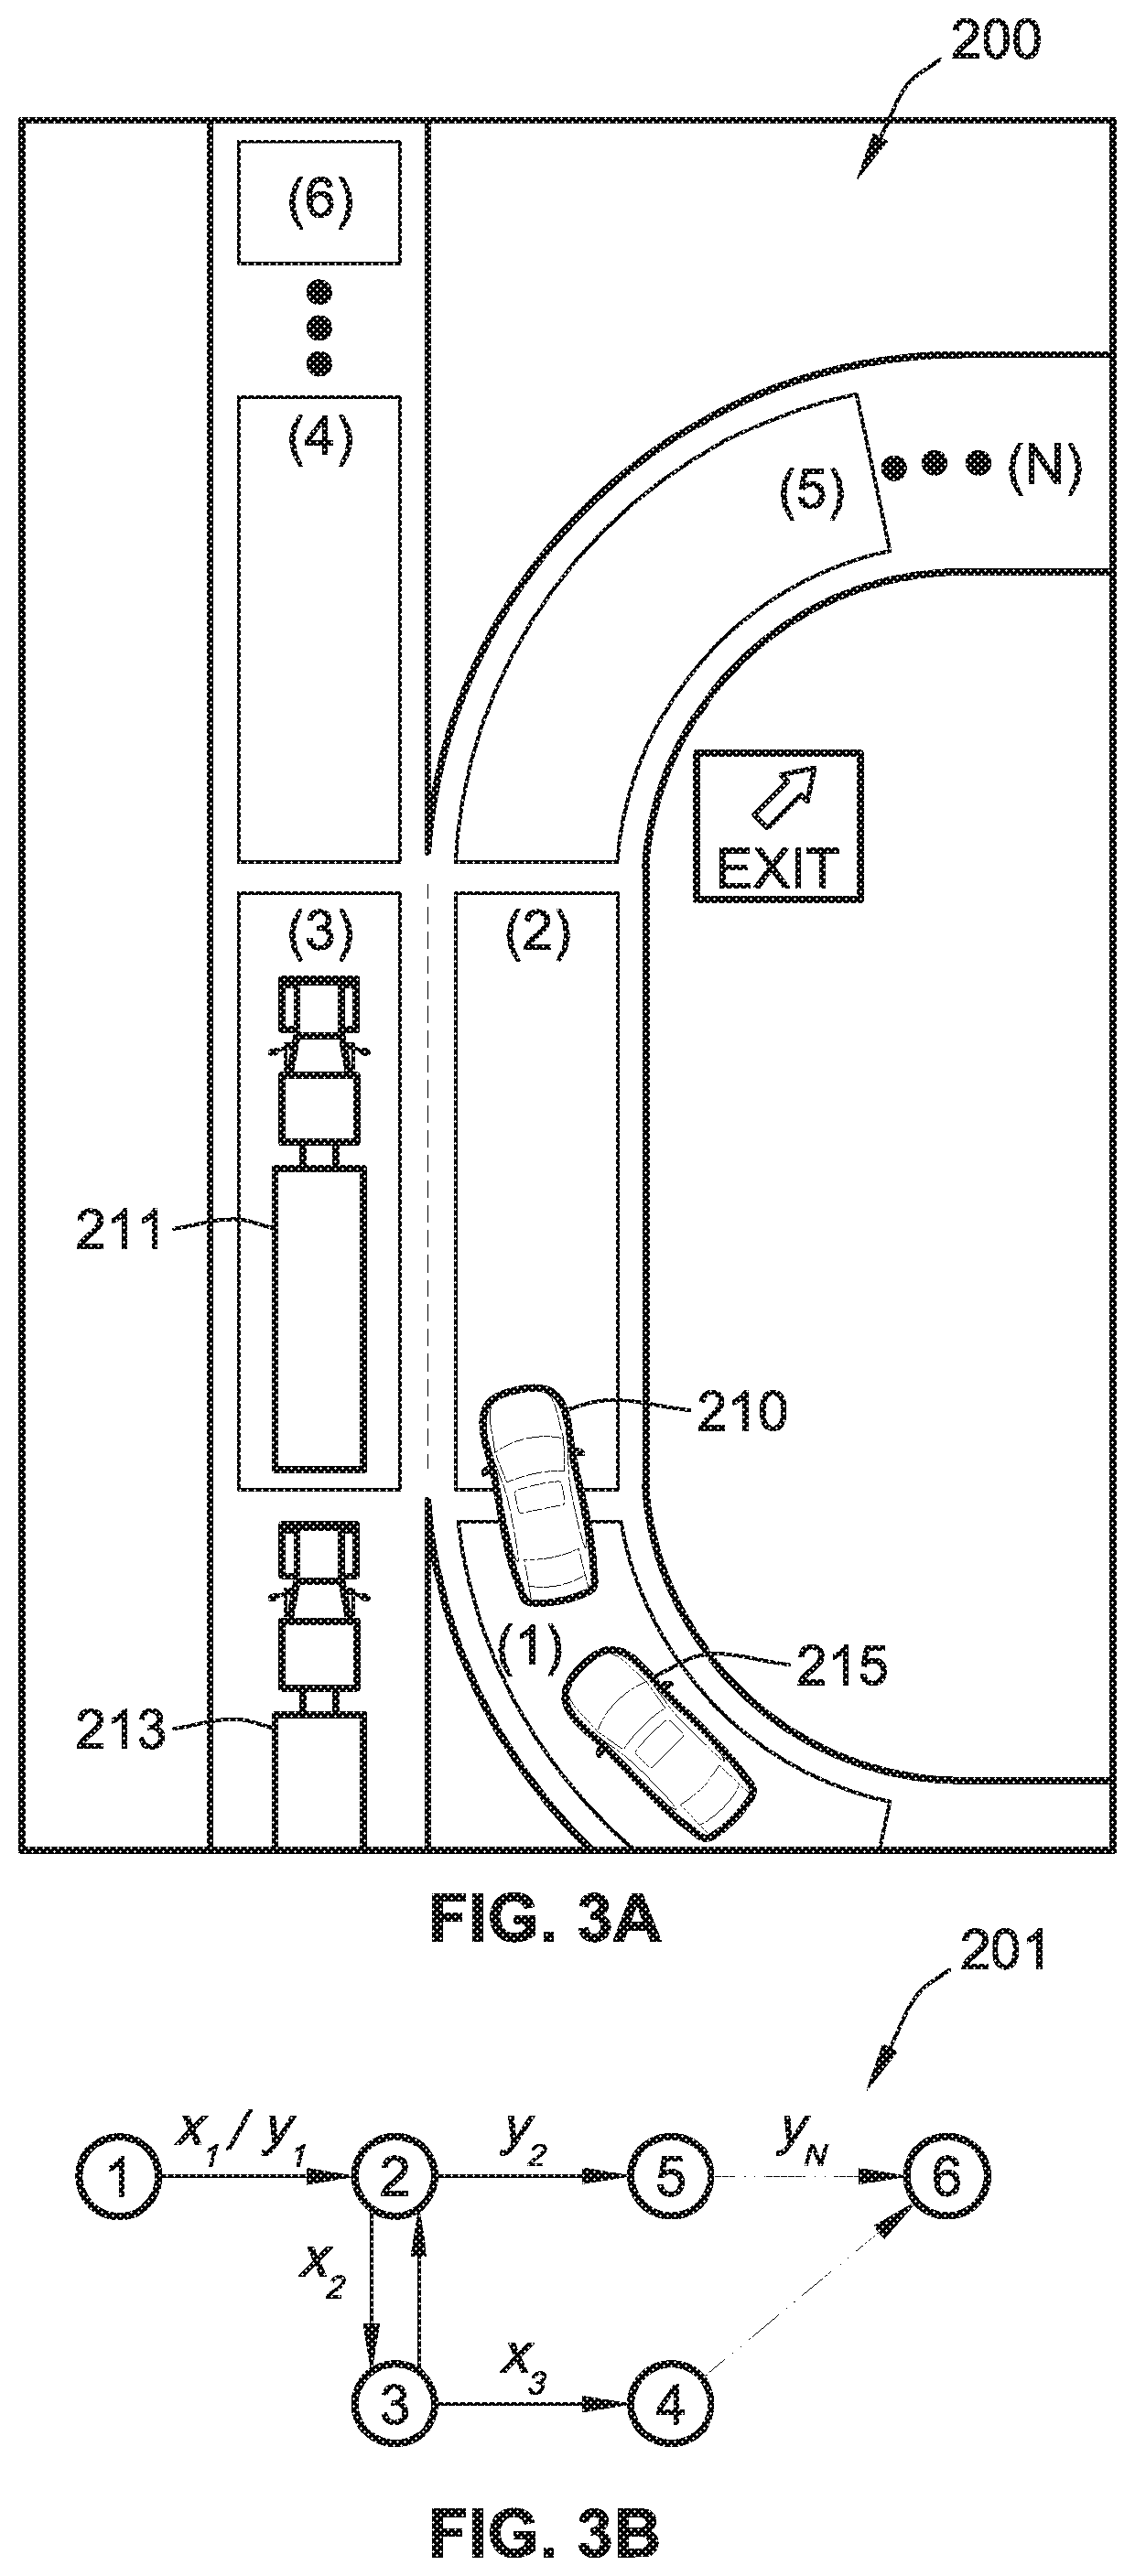 Automated driving systems and control logic using maneuver criticality for vehicle routing and mode adaptation